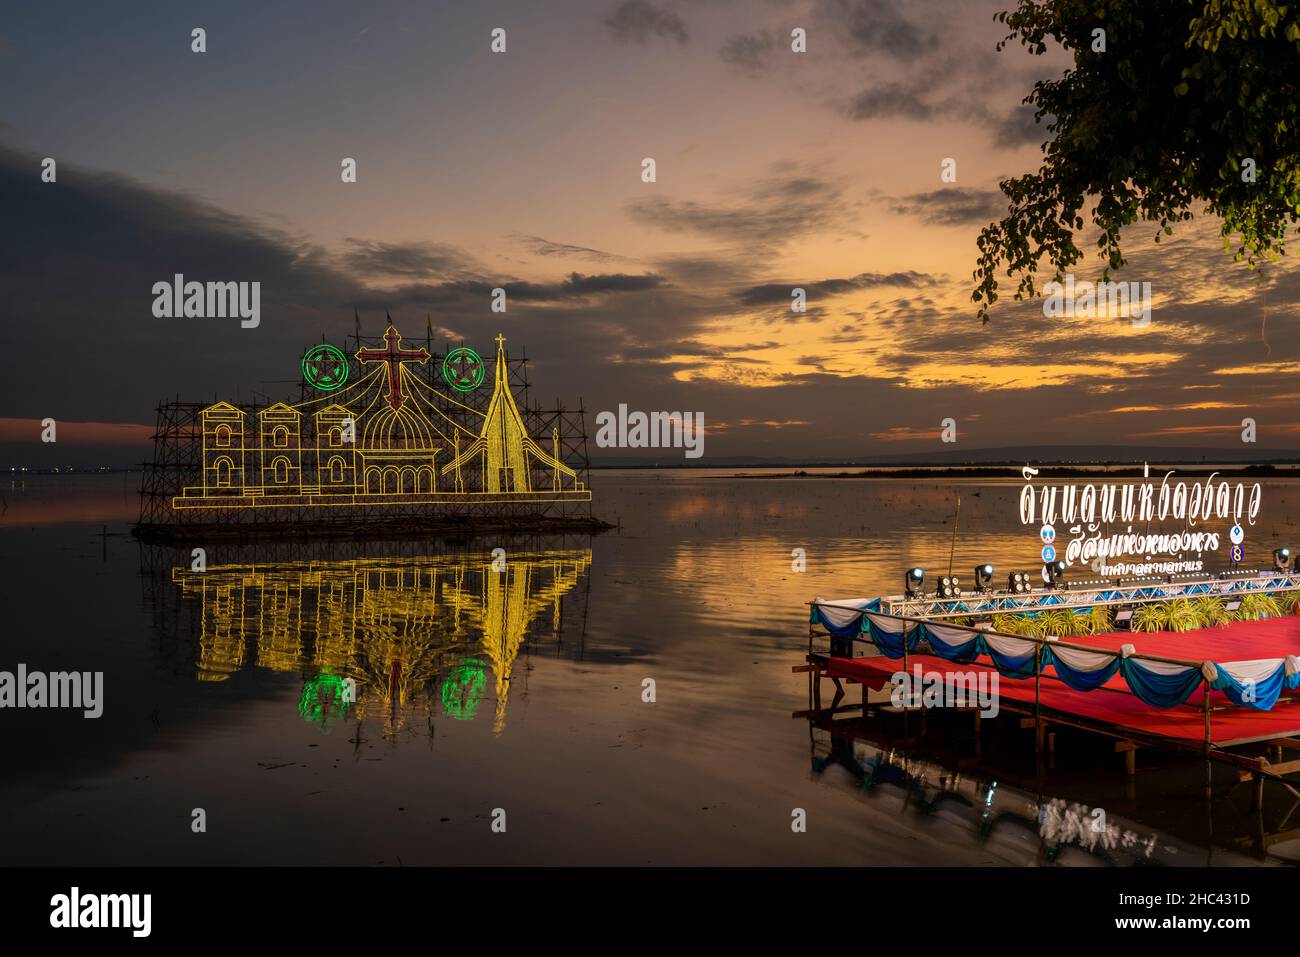 21 Dec  2021 Tha Rae Sakon Nakhon, Thailand.Christians decorate their boats with lights and stars to welcome the Christmas season. Tha Rae is Thailand Stock Photo